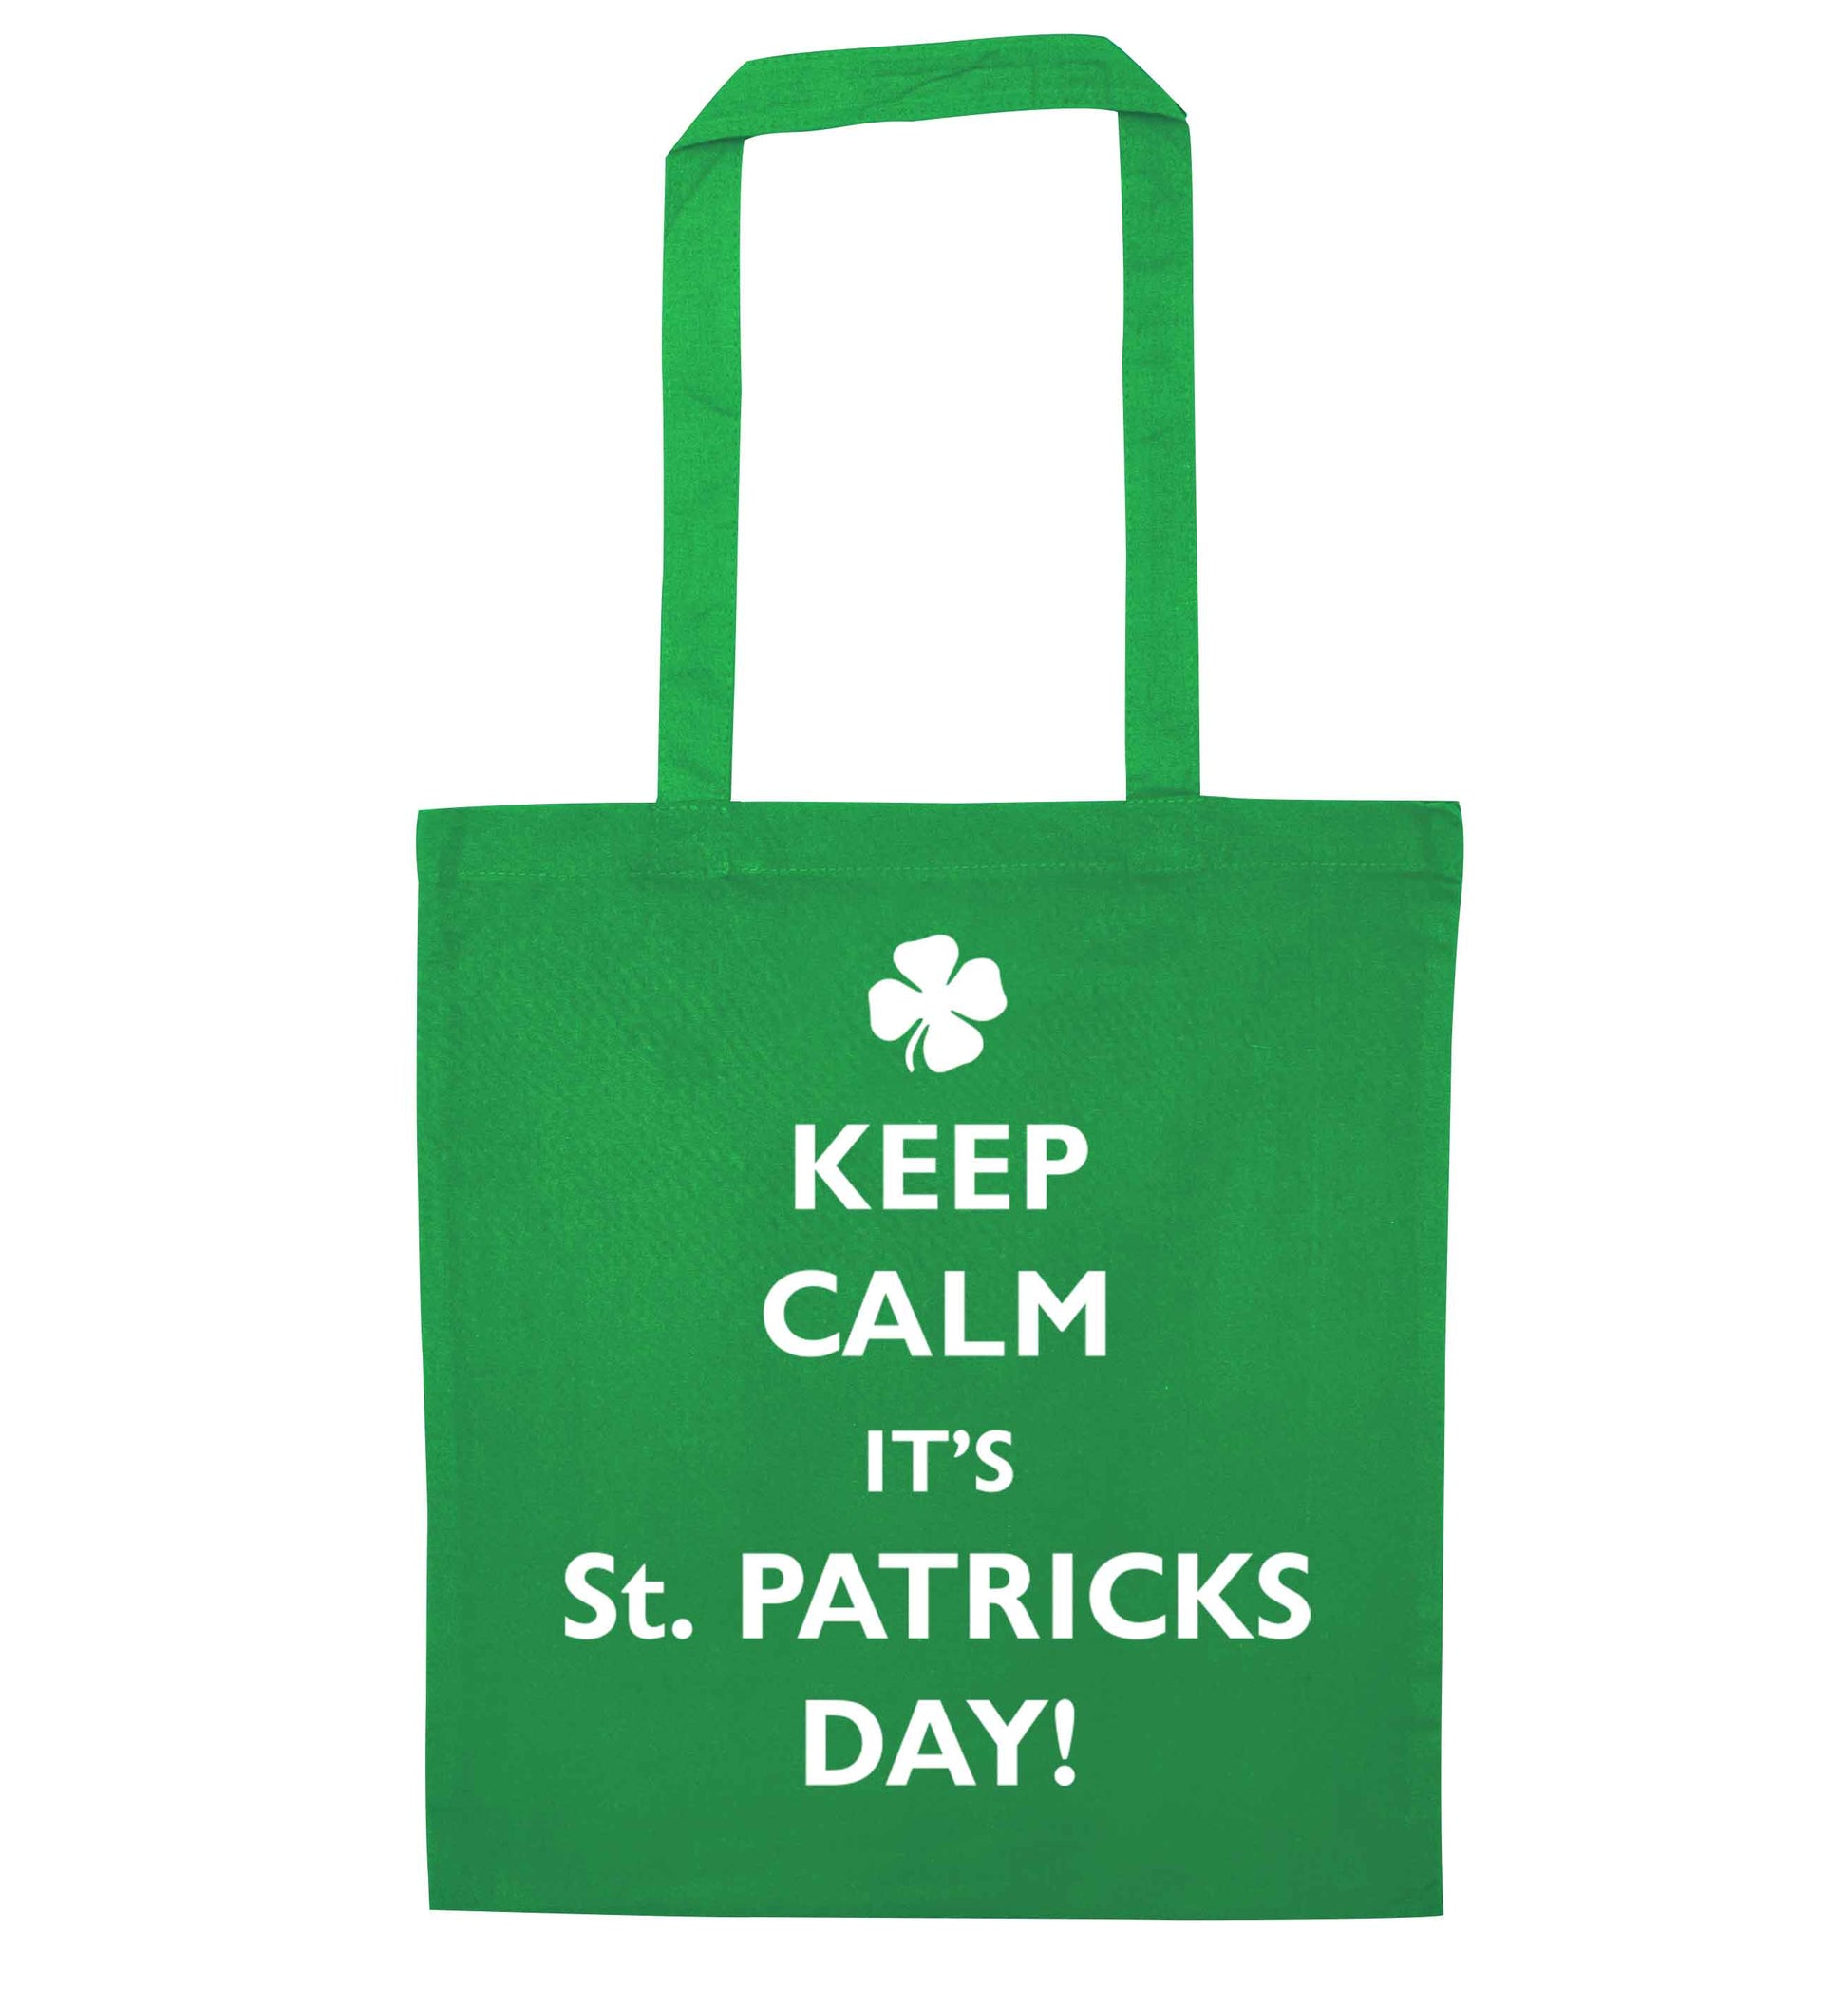 Keep calm it's St.Patricks day green tote bag